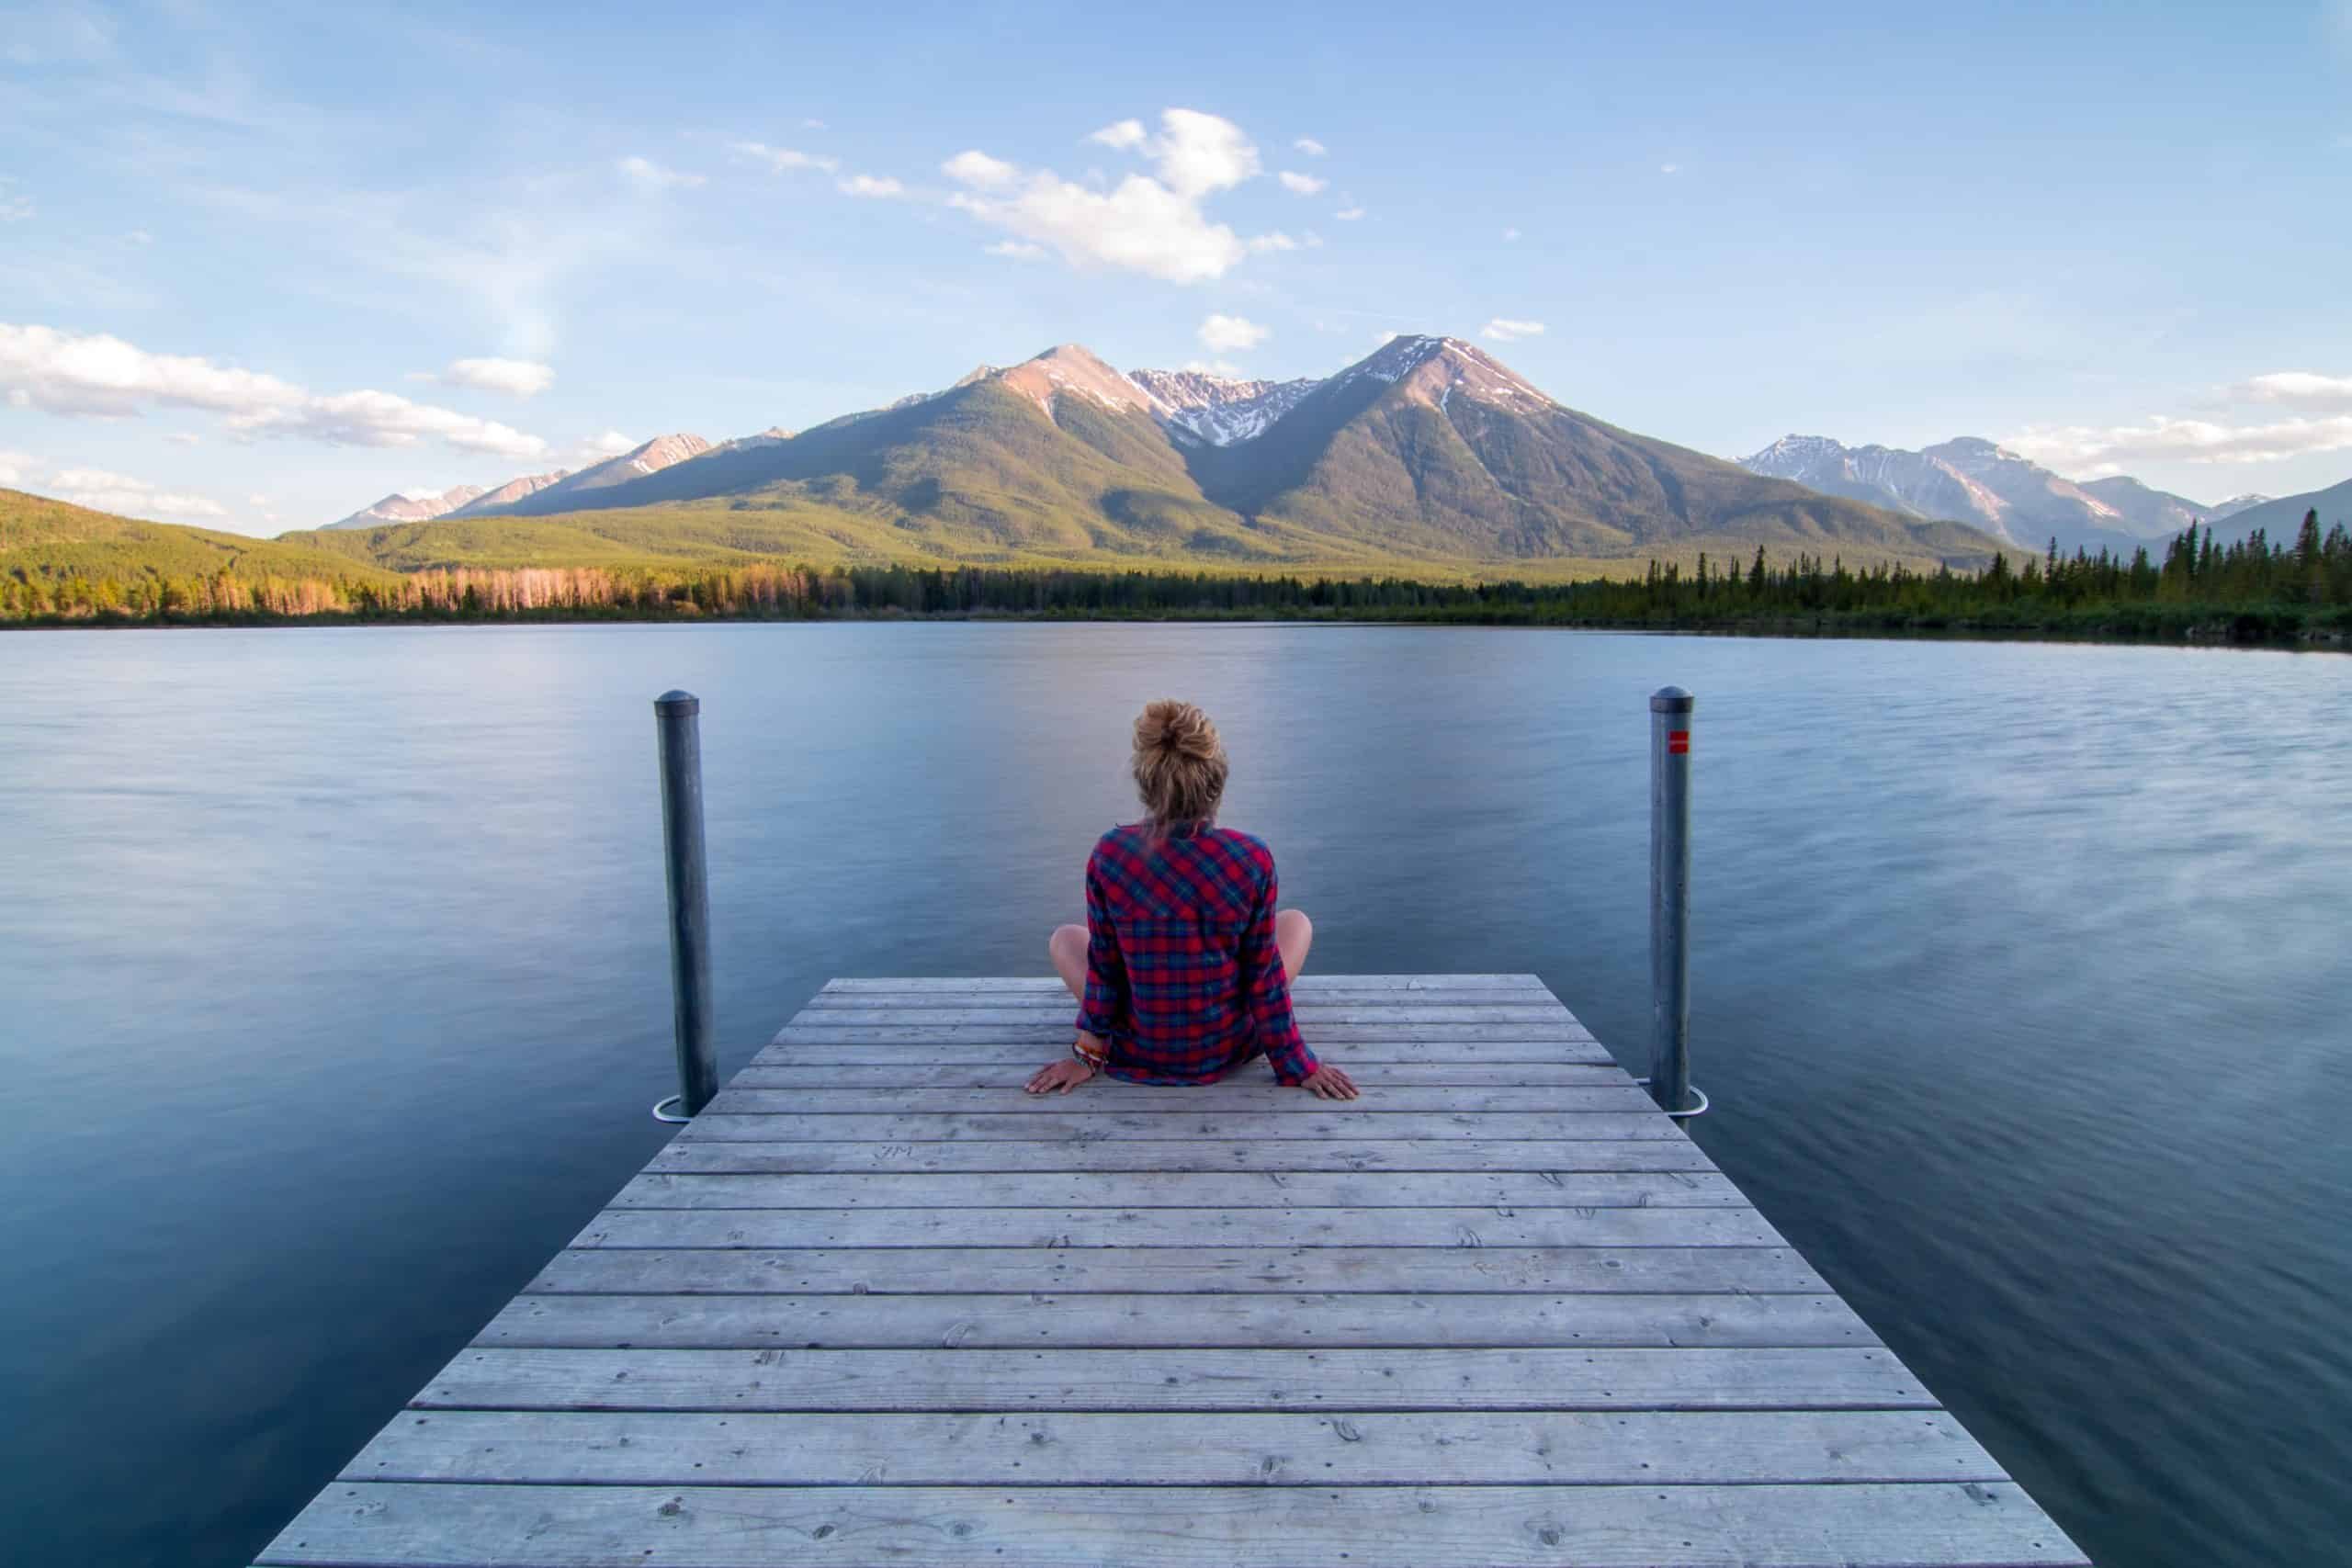 How To Find Peace: 7 Simple Techniques To Find Serenity